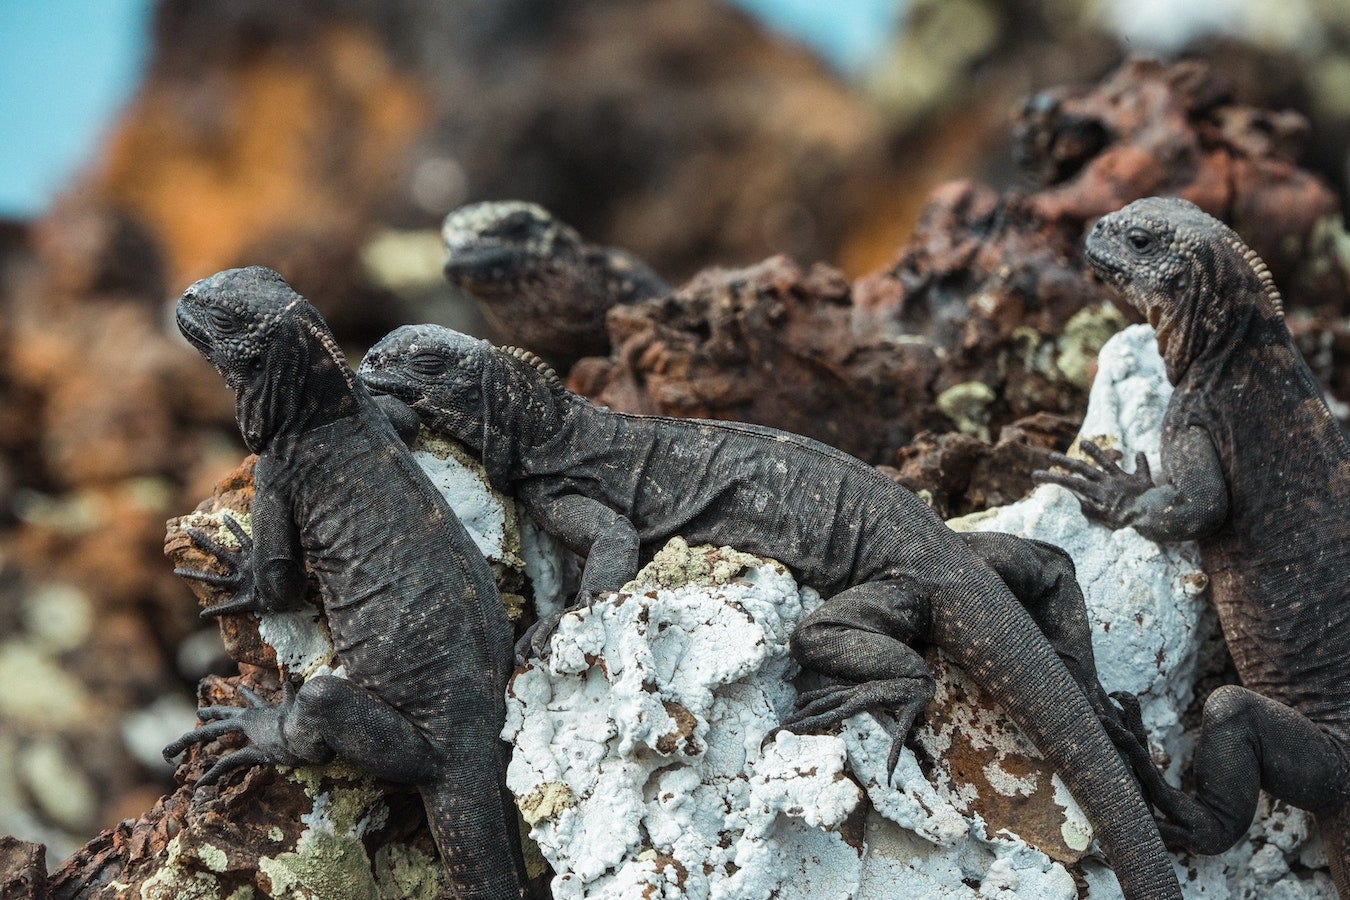 Several marine iguanas are resting dry on a rock on the shore. They have their eyes closed. Their skin is wrinkly and rough-looking.